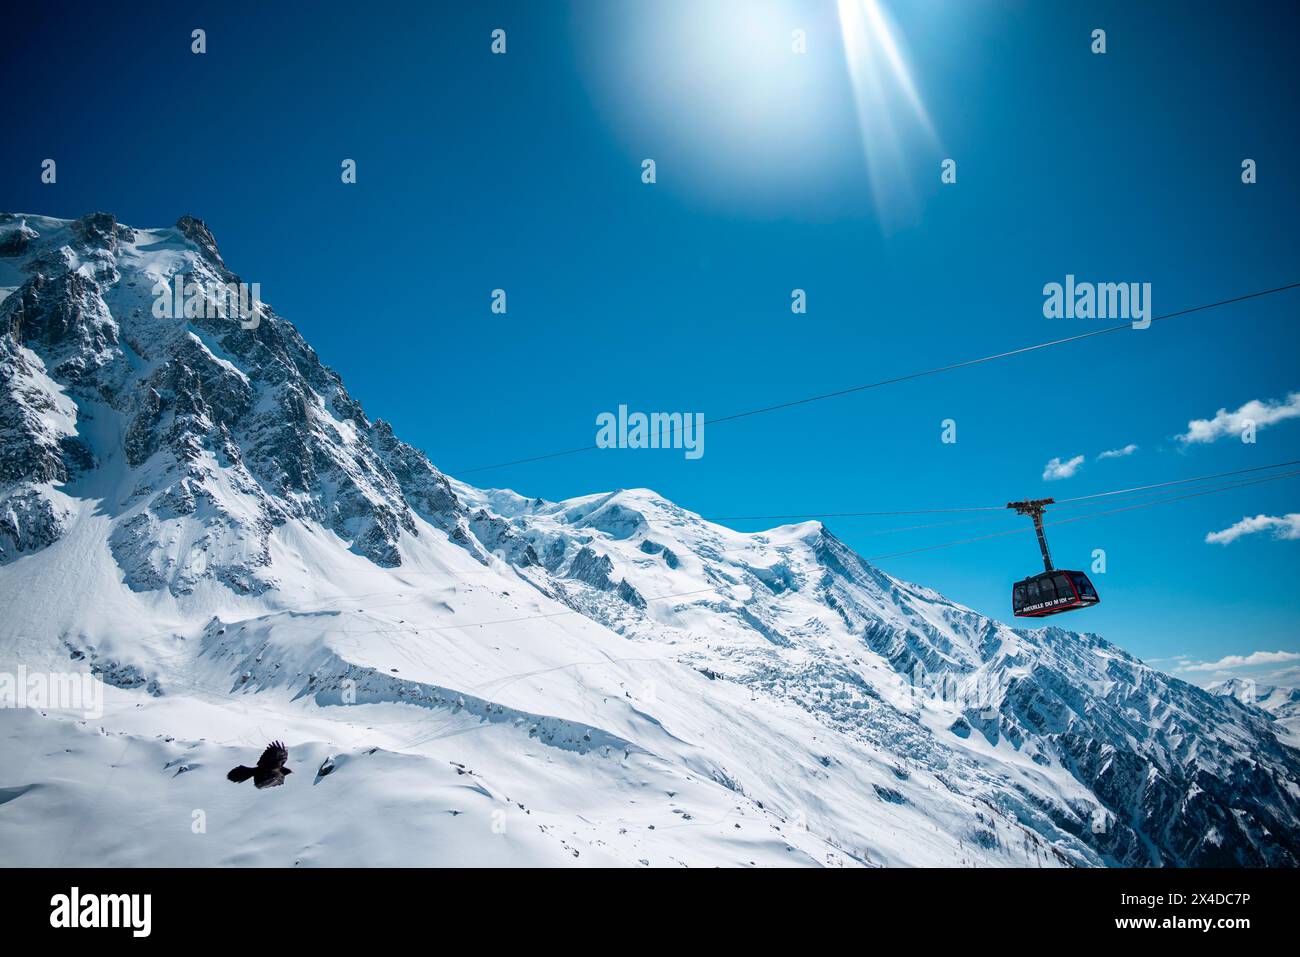 Cabin of the Aiguille du Midi cable car seen from the intermediate station at Plan du Aiguille. Mont Blanc and the Alps. Chamonix, France Stock Photo